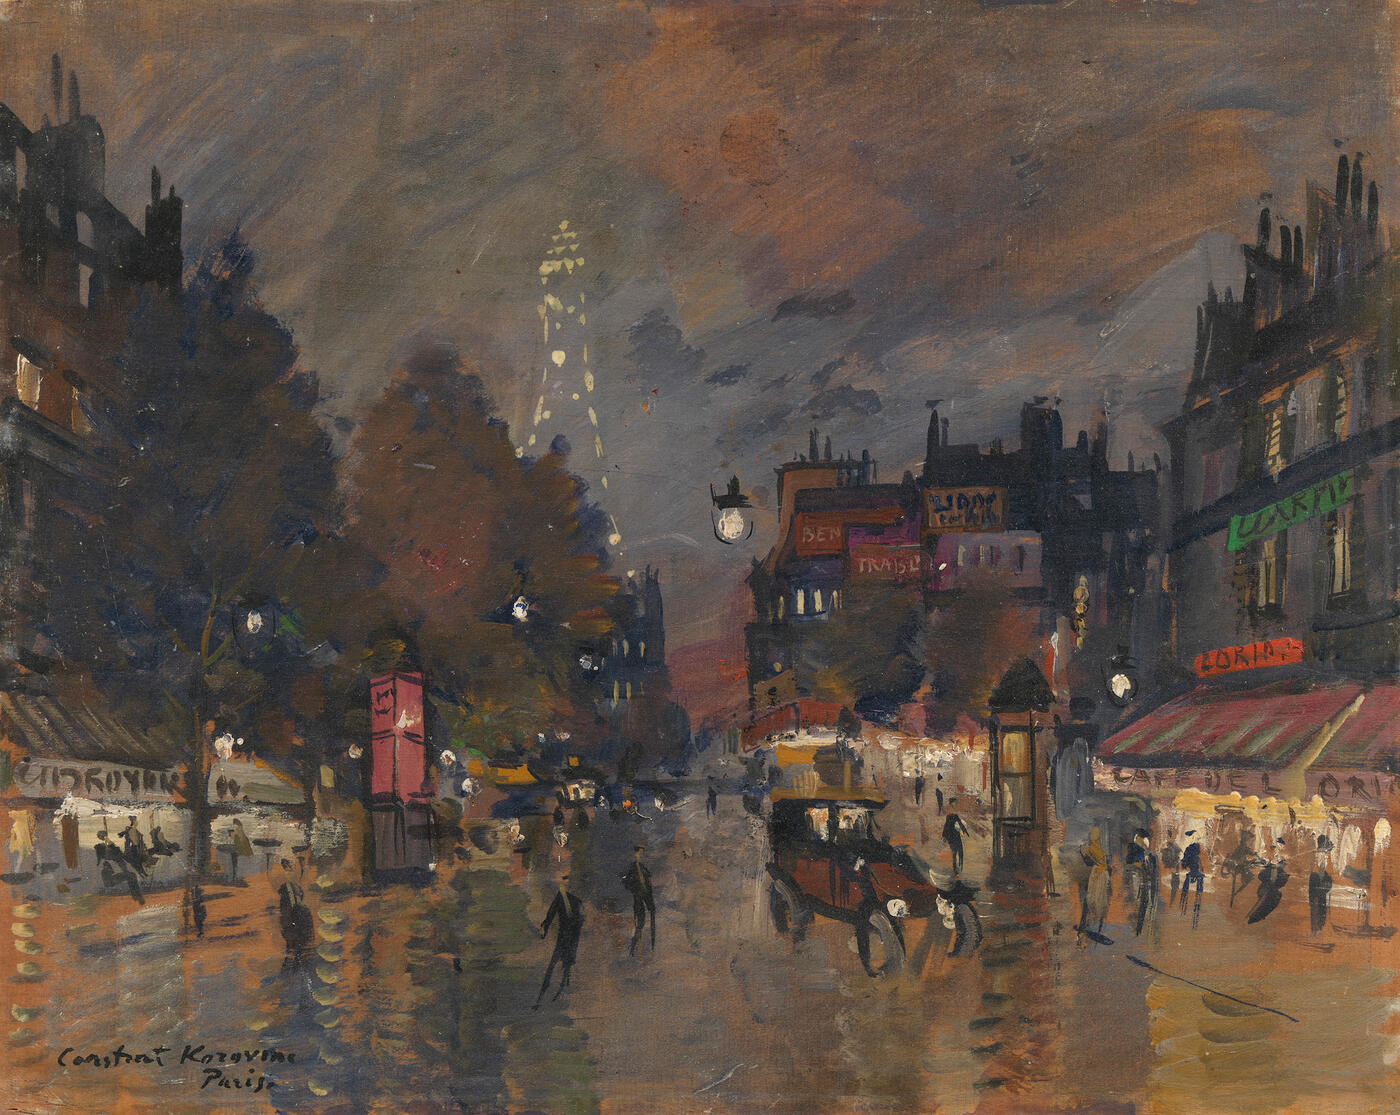 Paris at Night. Landscape with the Eiffel Tower